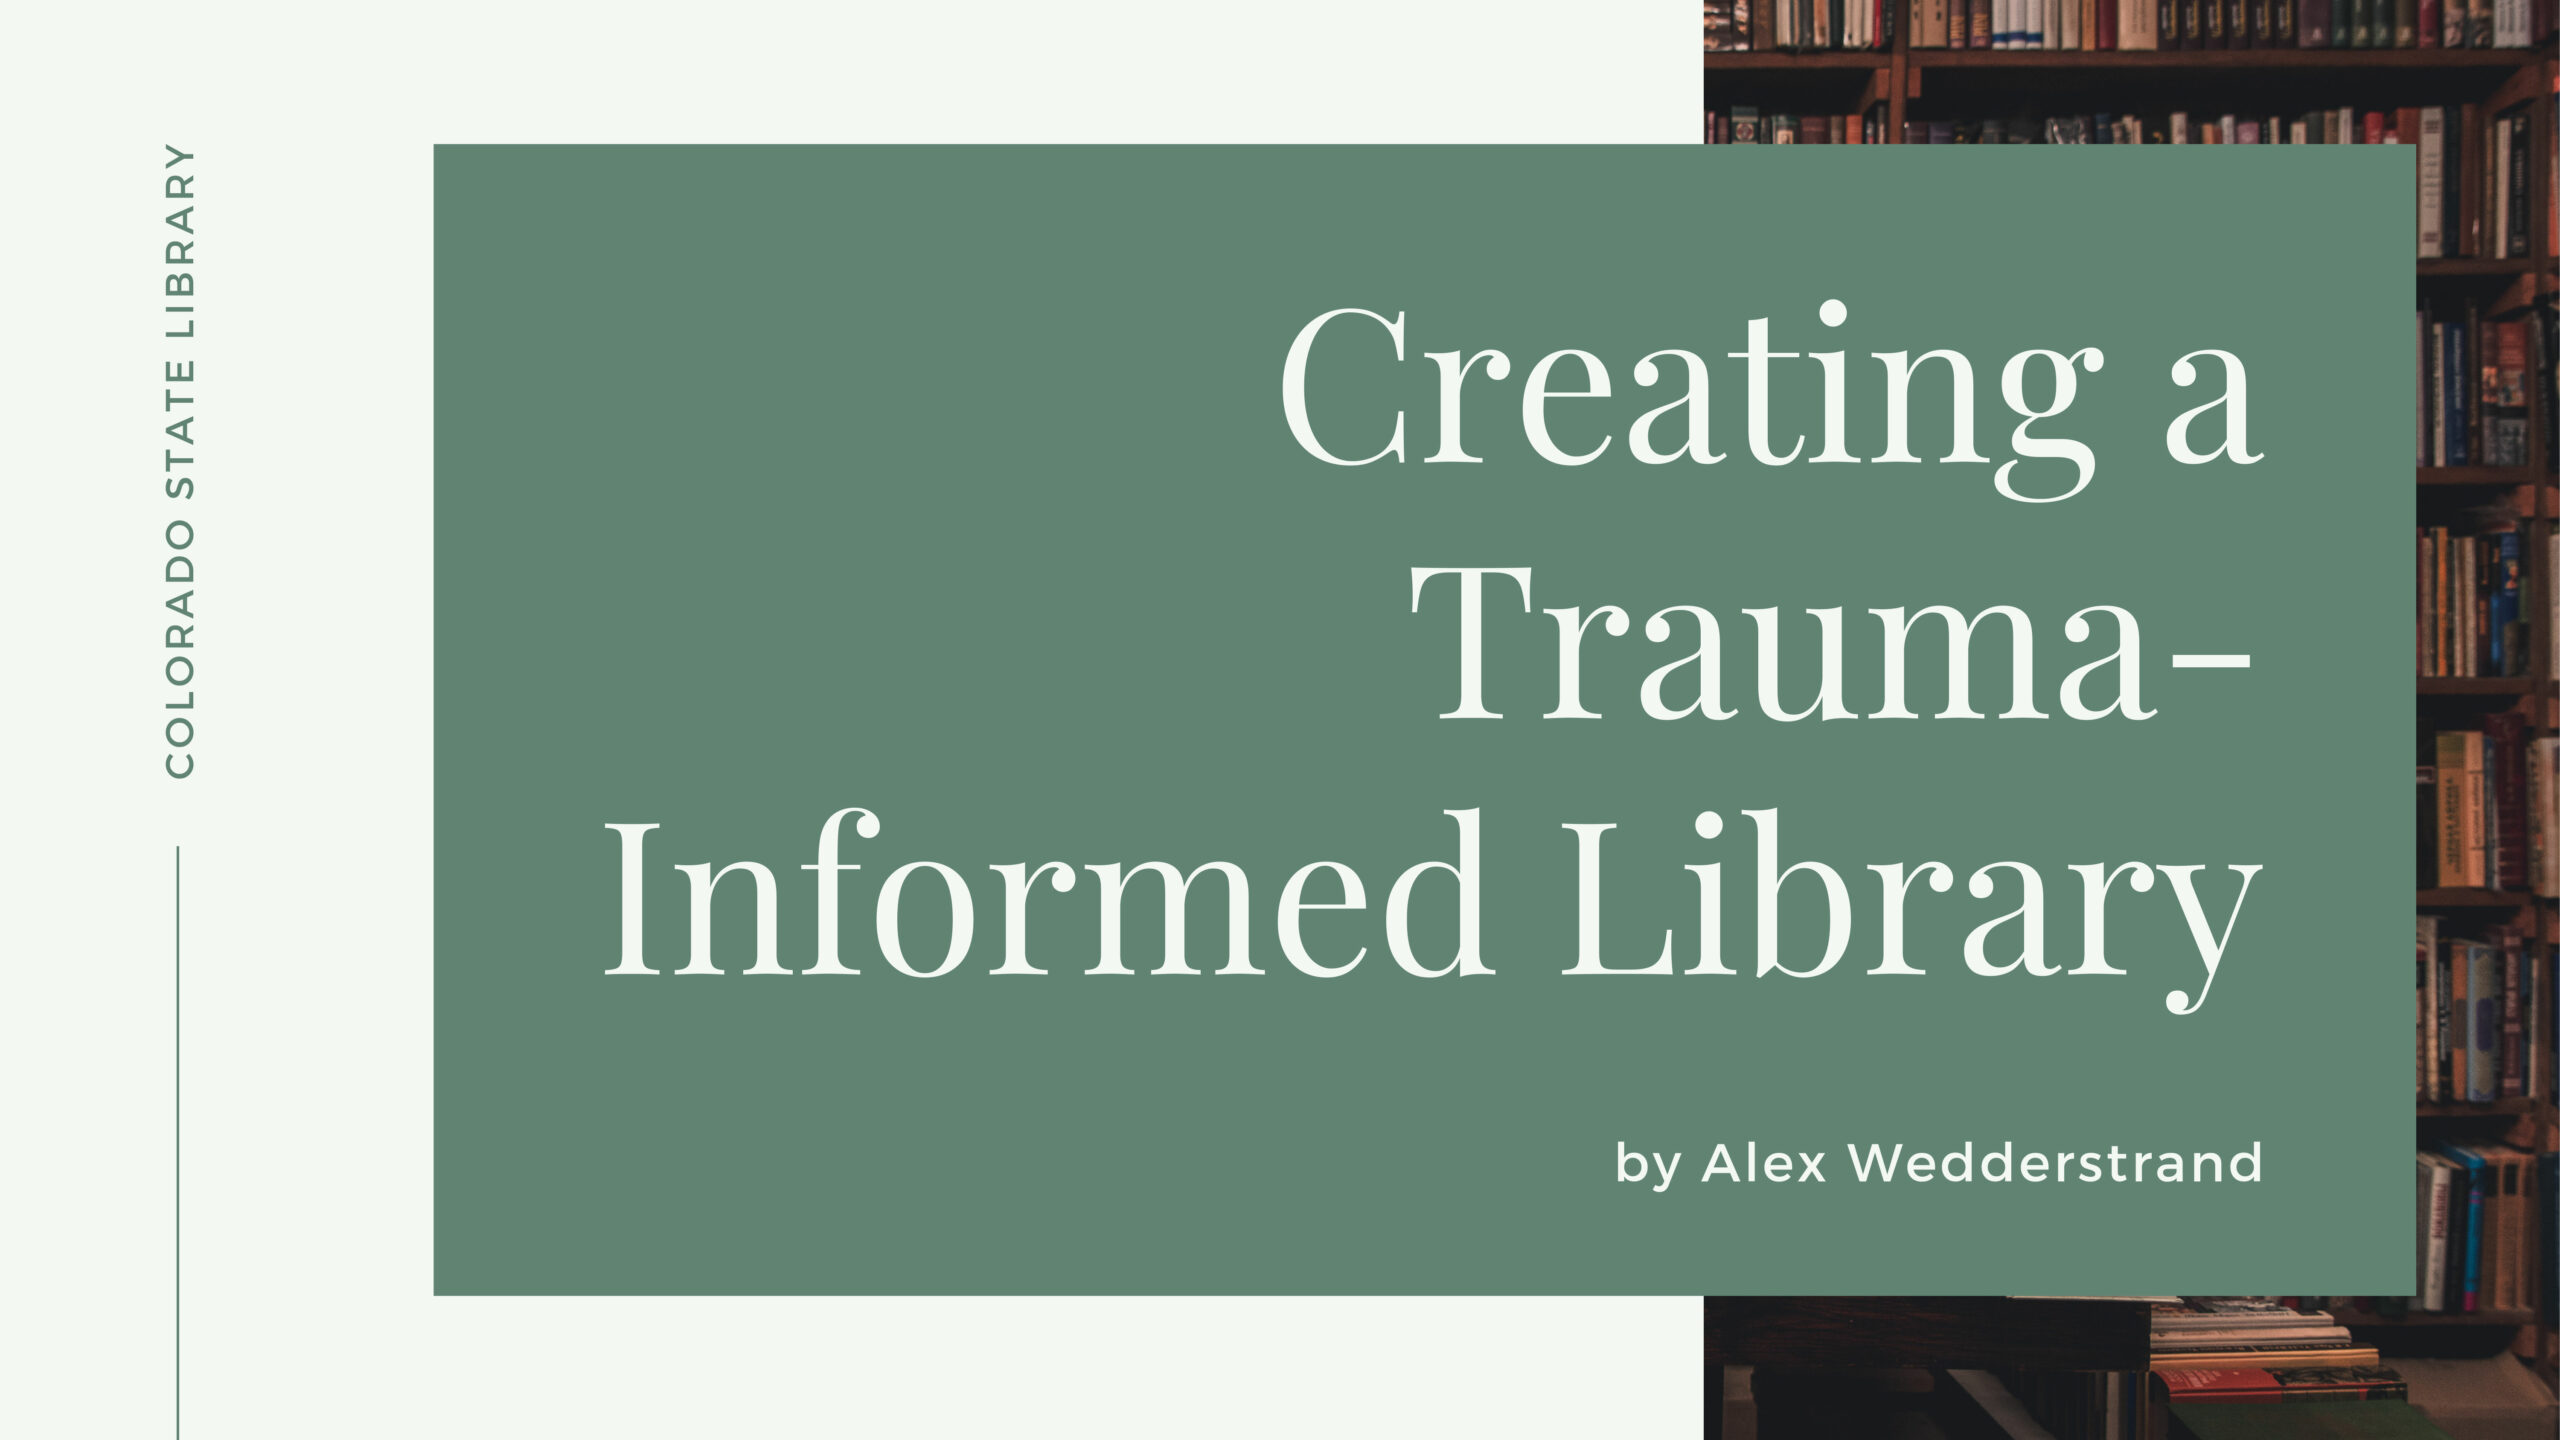 Creating a Trauma-Informed Library